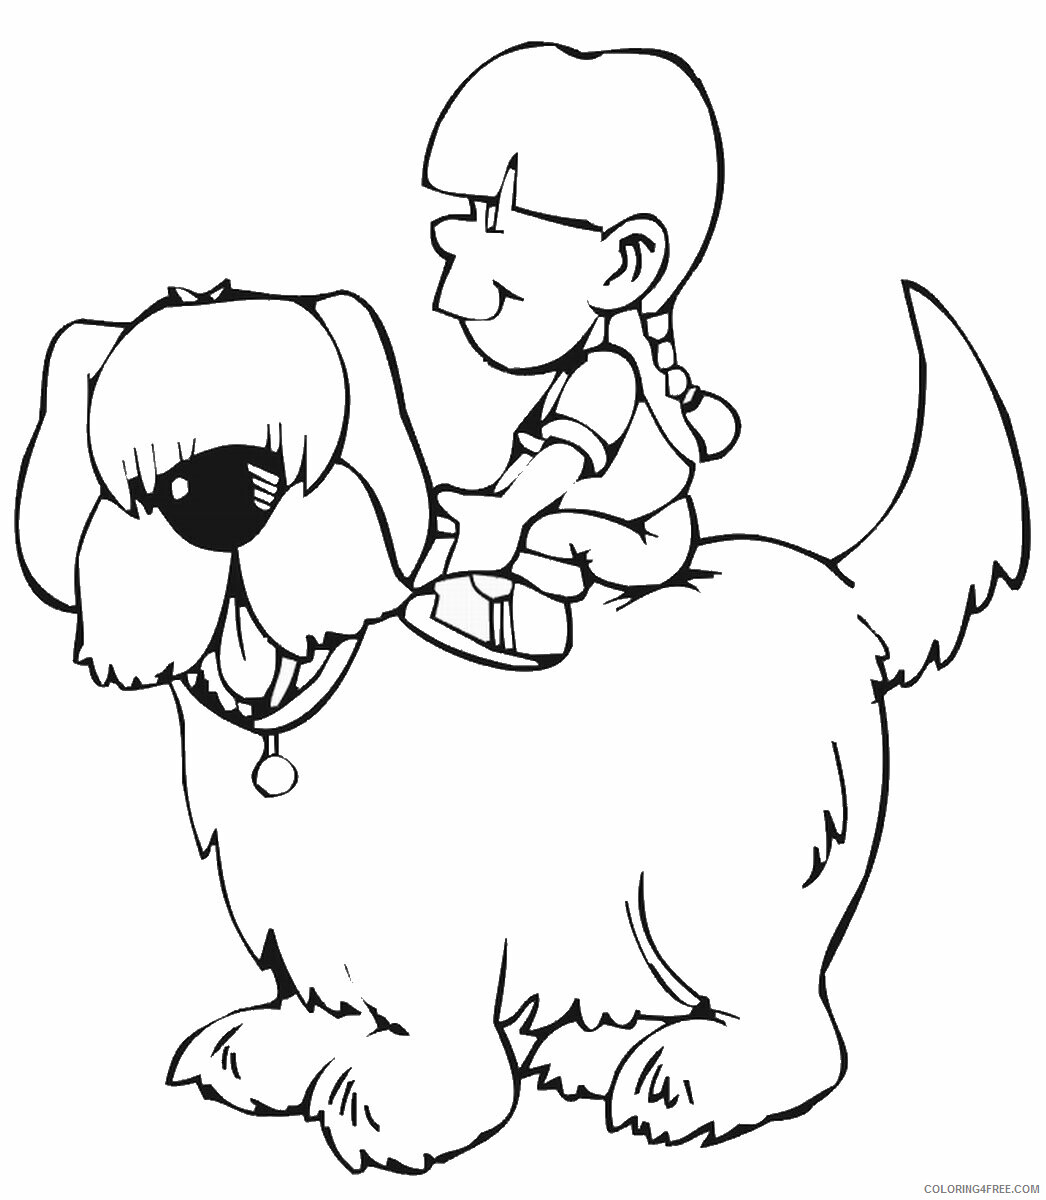 Dogs Coloring Pages Animal Printable Sheets dog_15 2021 1552 Coloring4free